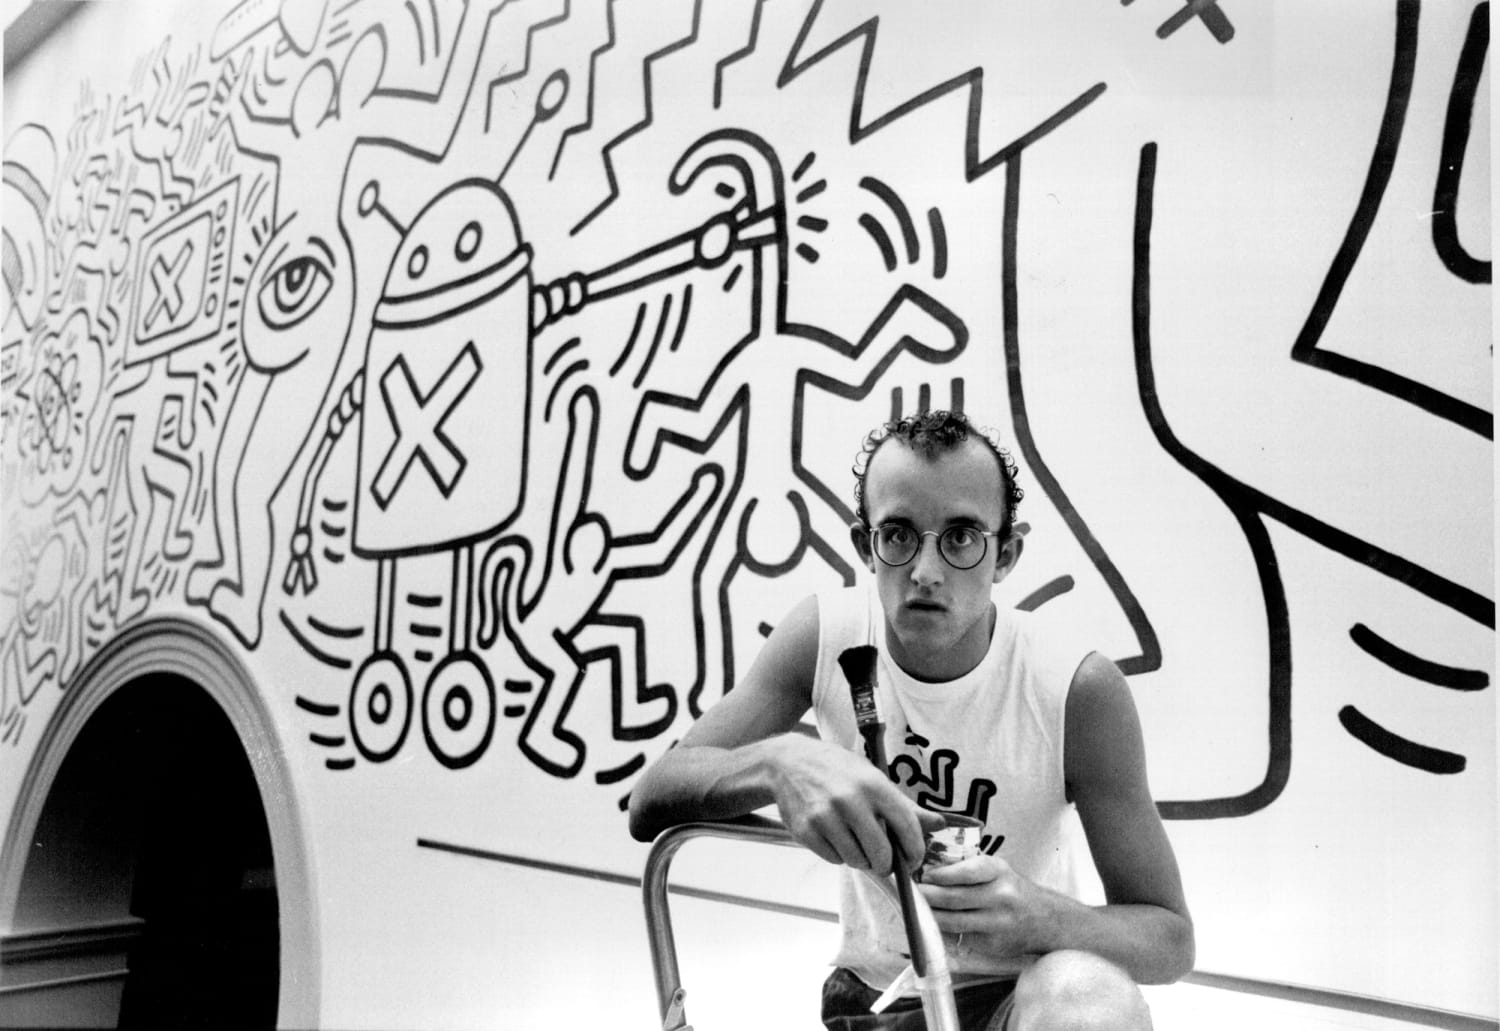 Street Art Shooting - Body Painting inspired by Keith Haring